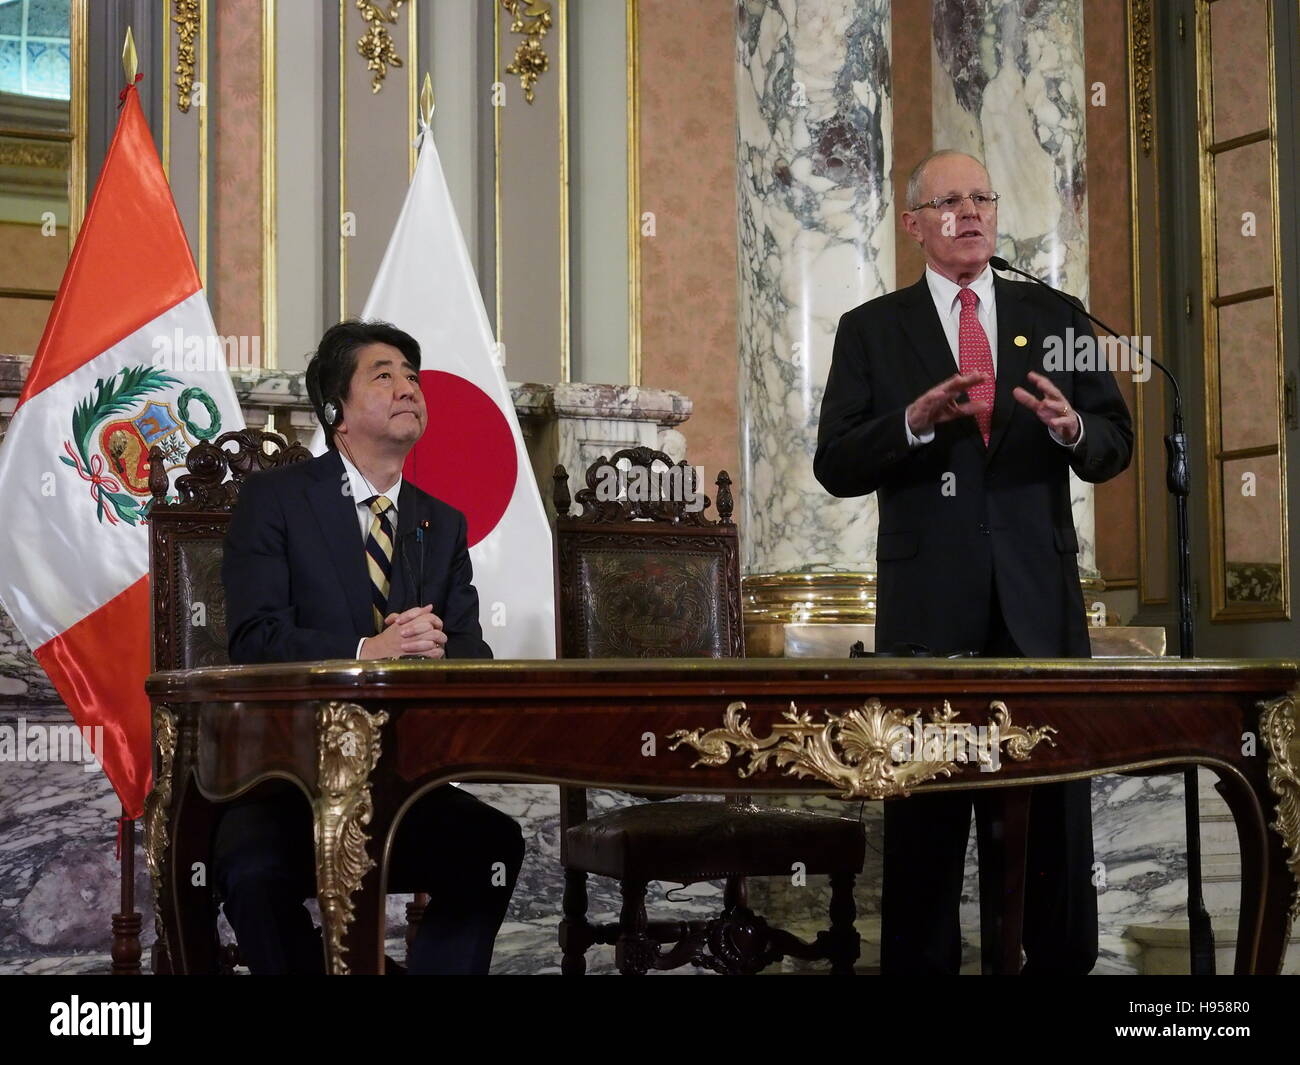 Lima, Peru. 18 November, 2016. Prime Minister of Japan, Shinzo Abe, arrived to Peru on an official visit within the framework of APEC 2016. The Prime Minister was received by the President of Peru, Pedro Pablo Kuczynski, and participated in a series of activities, such as the signing of bilateral agreements in communications (c) Carlos Garcia Granthon/Fotoholica/Alamy Live News Stock Photo